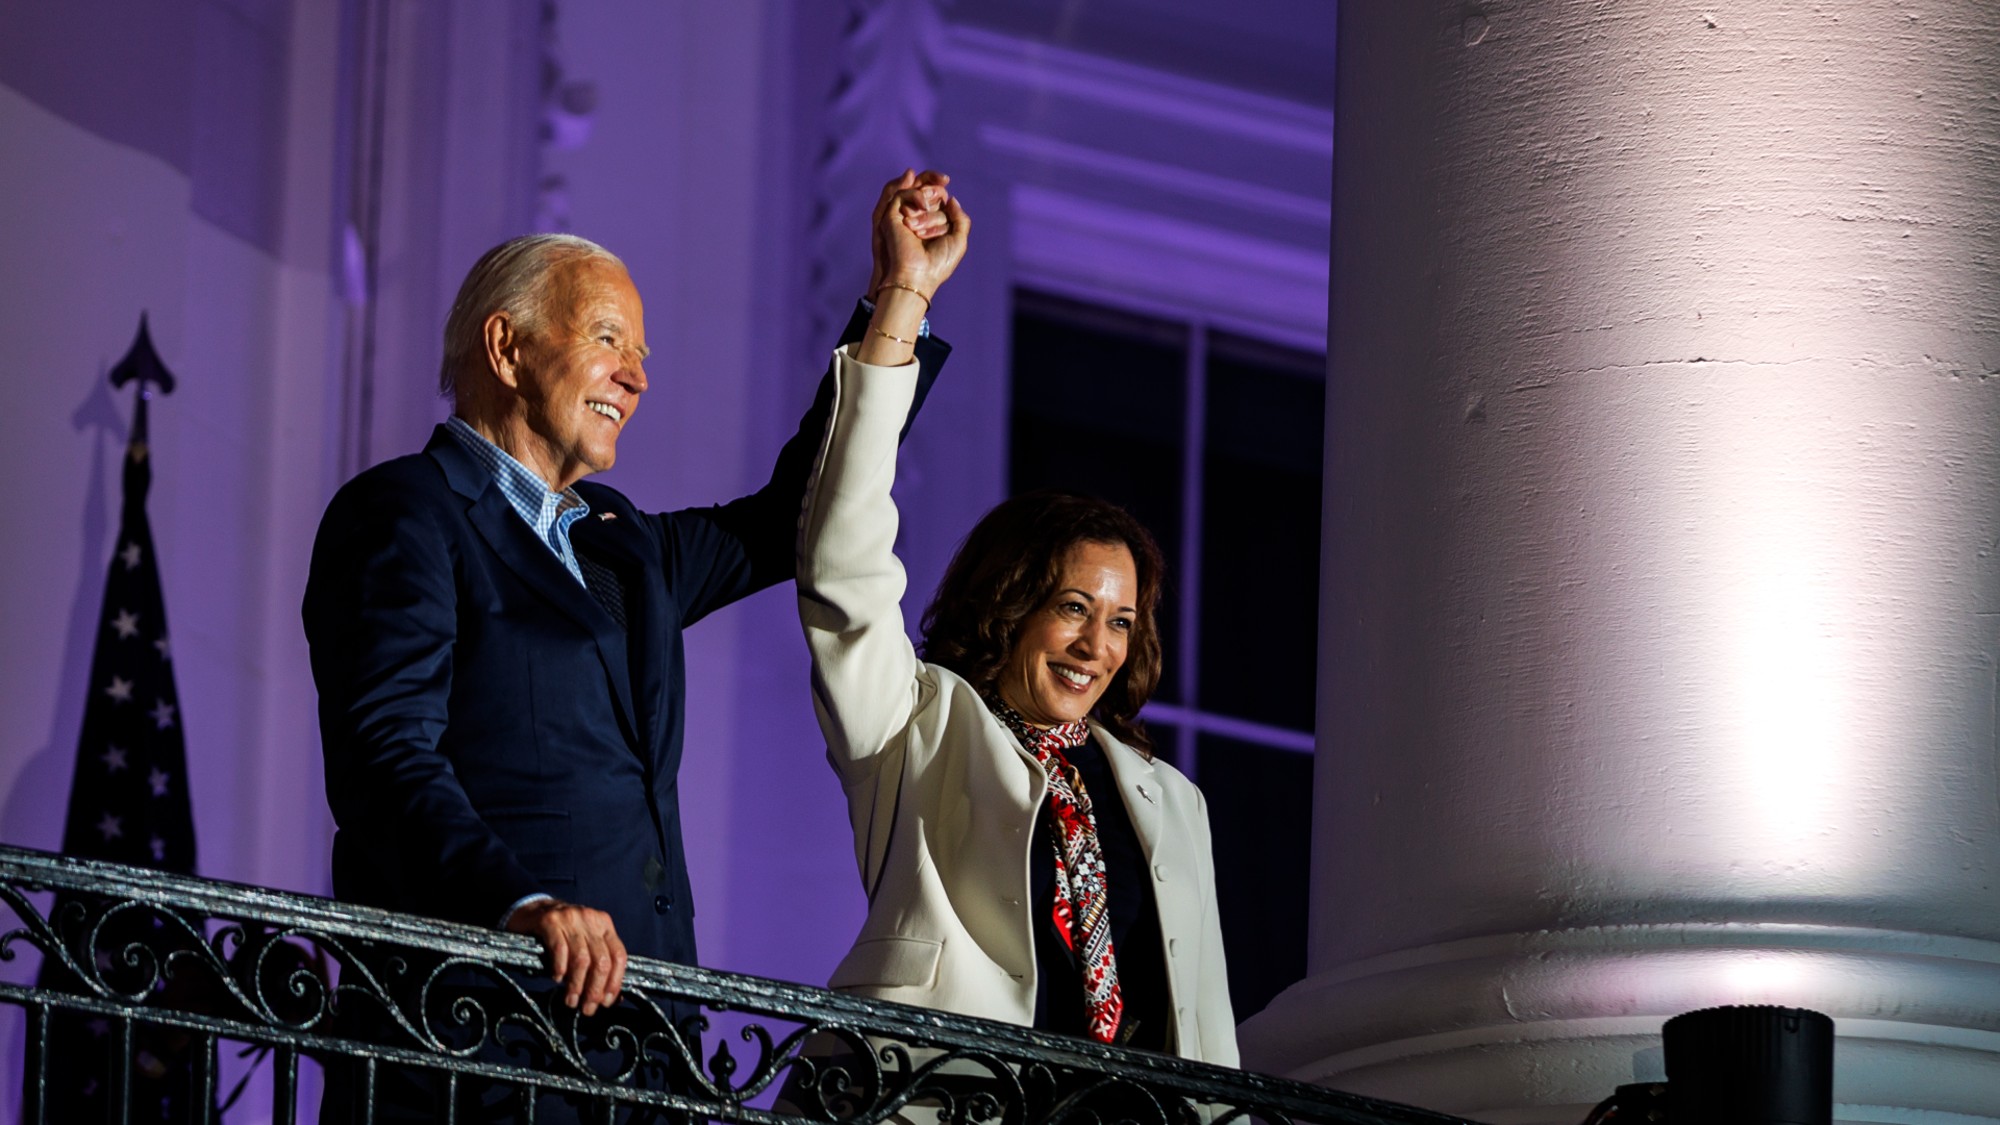  Who could replace Biden as the Democratic nominee? 